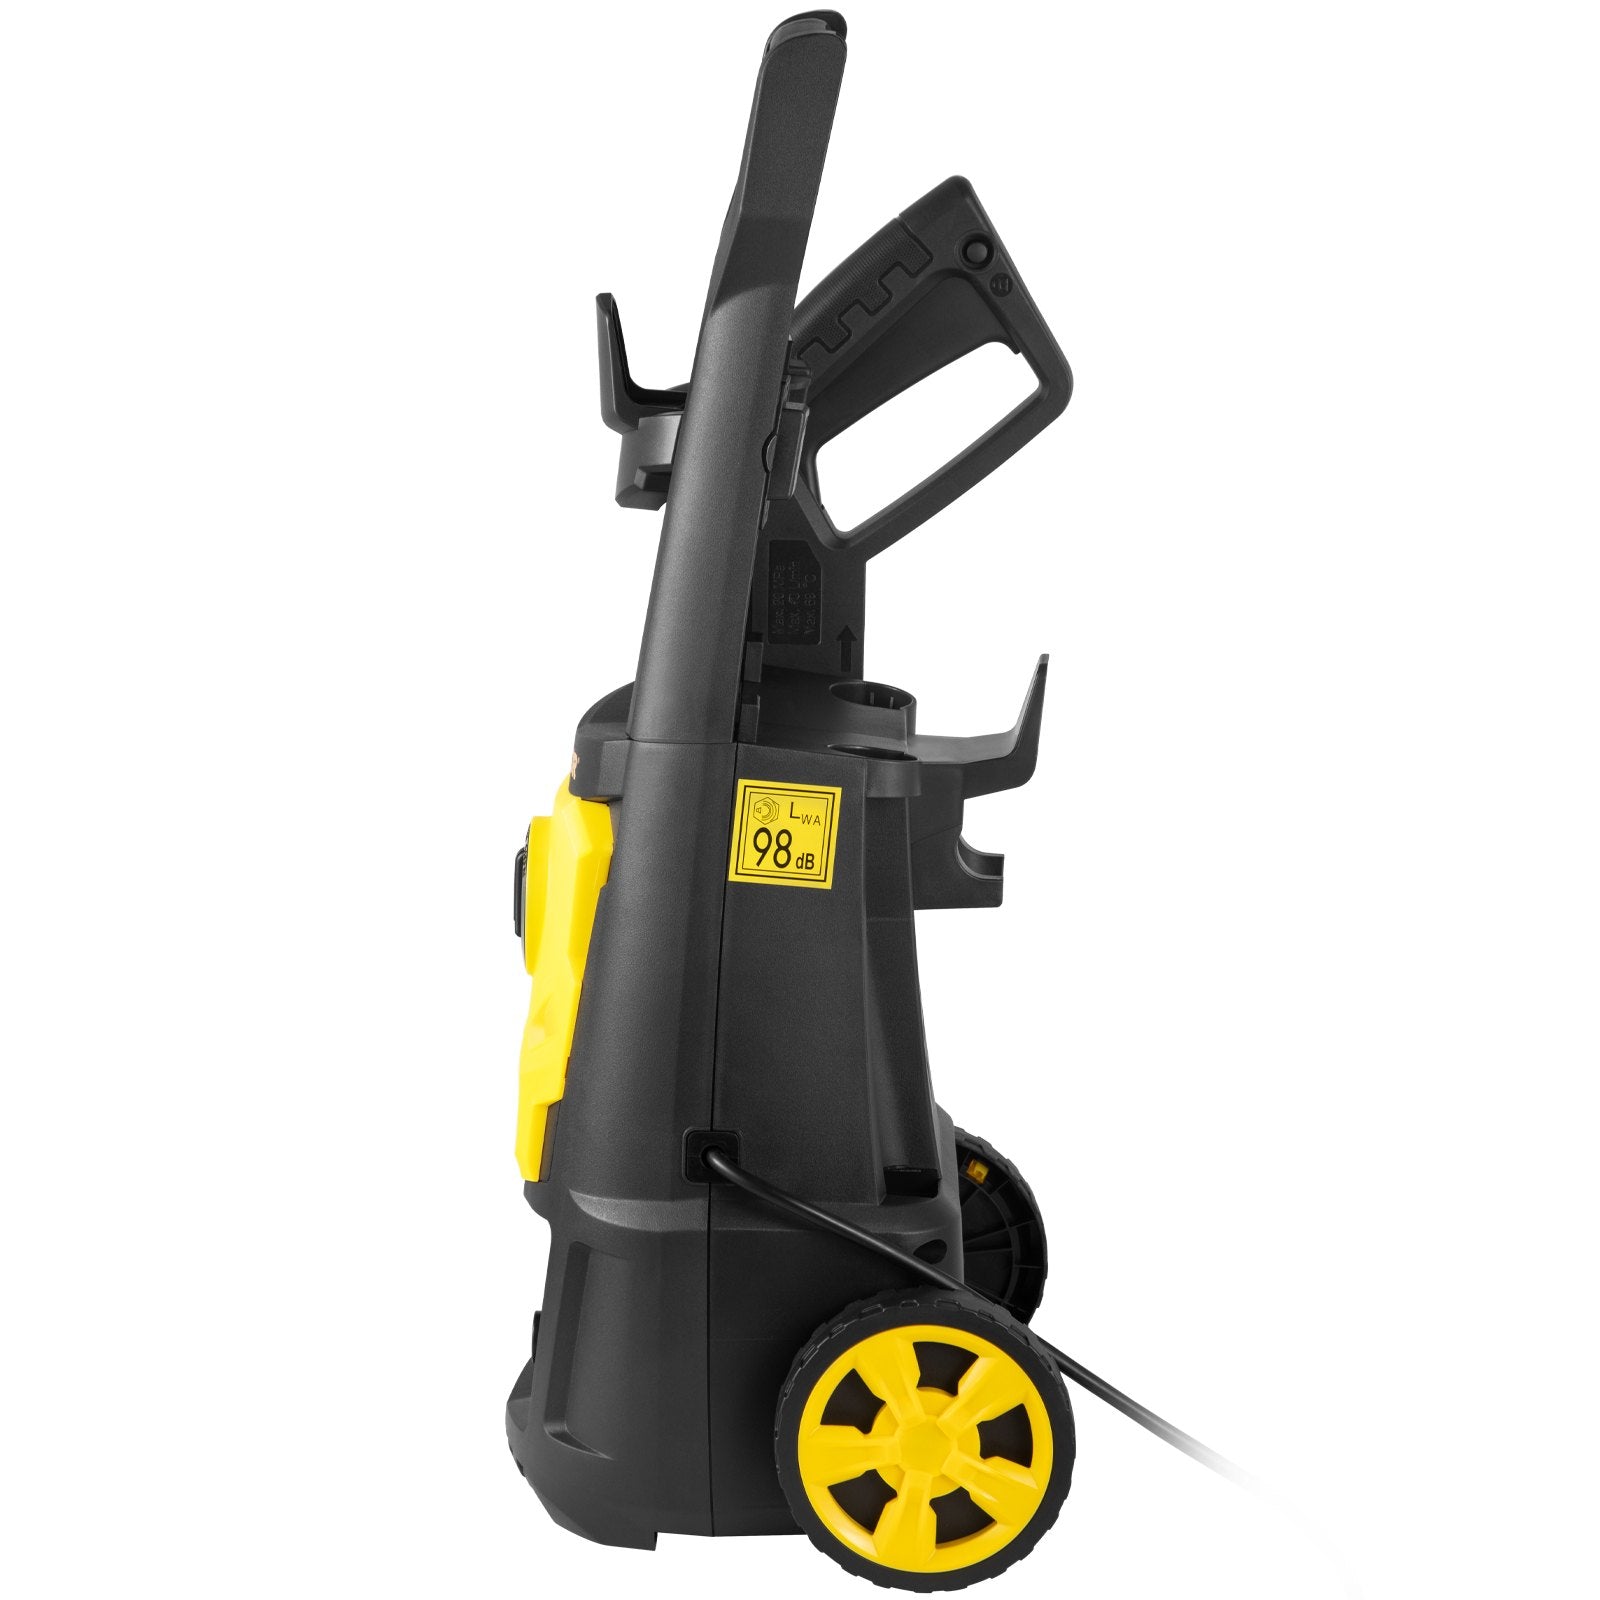 VEVOR Electric Pressure Washer, 2000 PSI, Max. 1.76 GPM Power Washer w/ 30 ft Hose, 5 Quick Connect Nozzles, Foam Cannon, Portable to Clean Patios, Cars, Fences, Driveways, ETL Listed-8